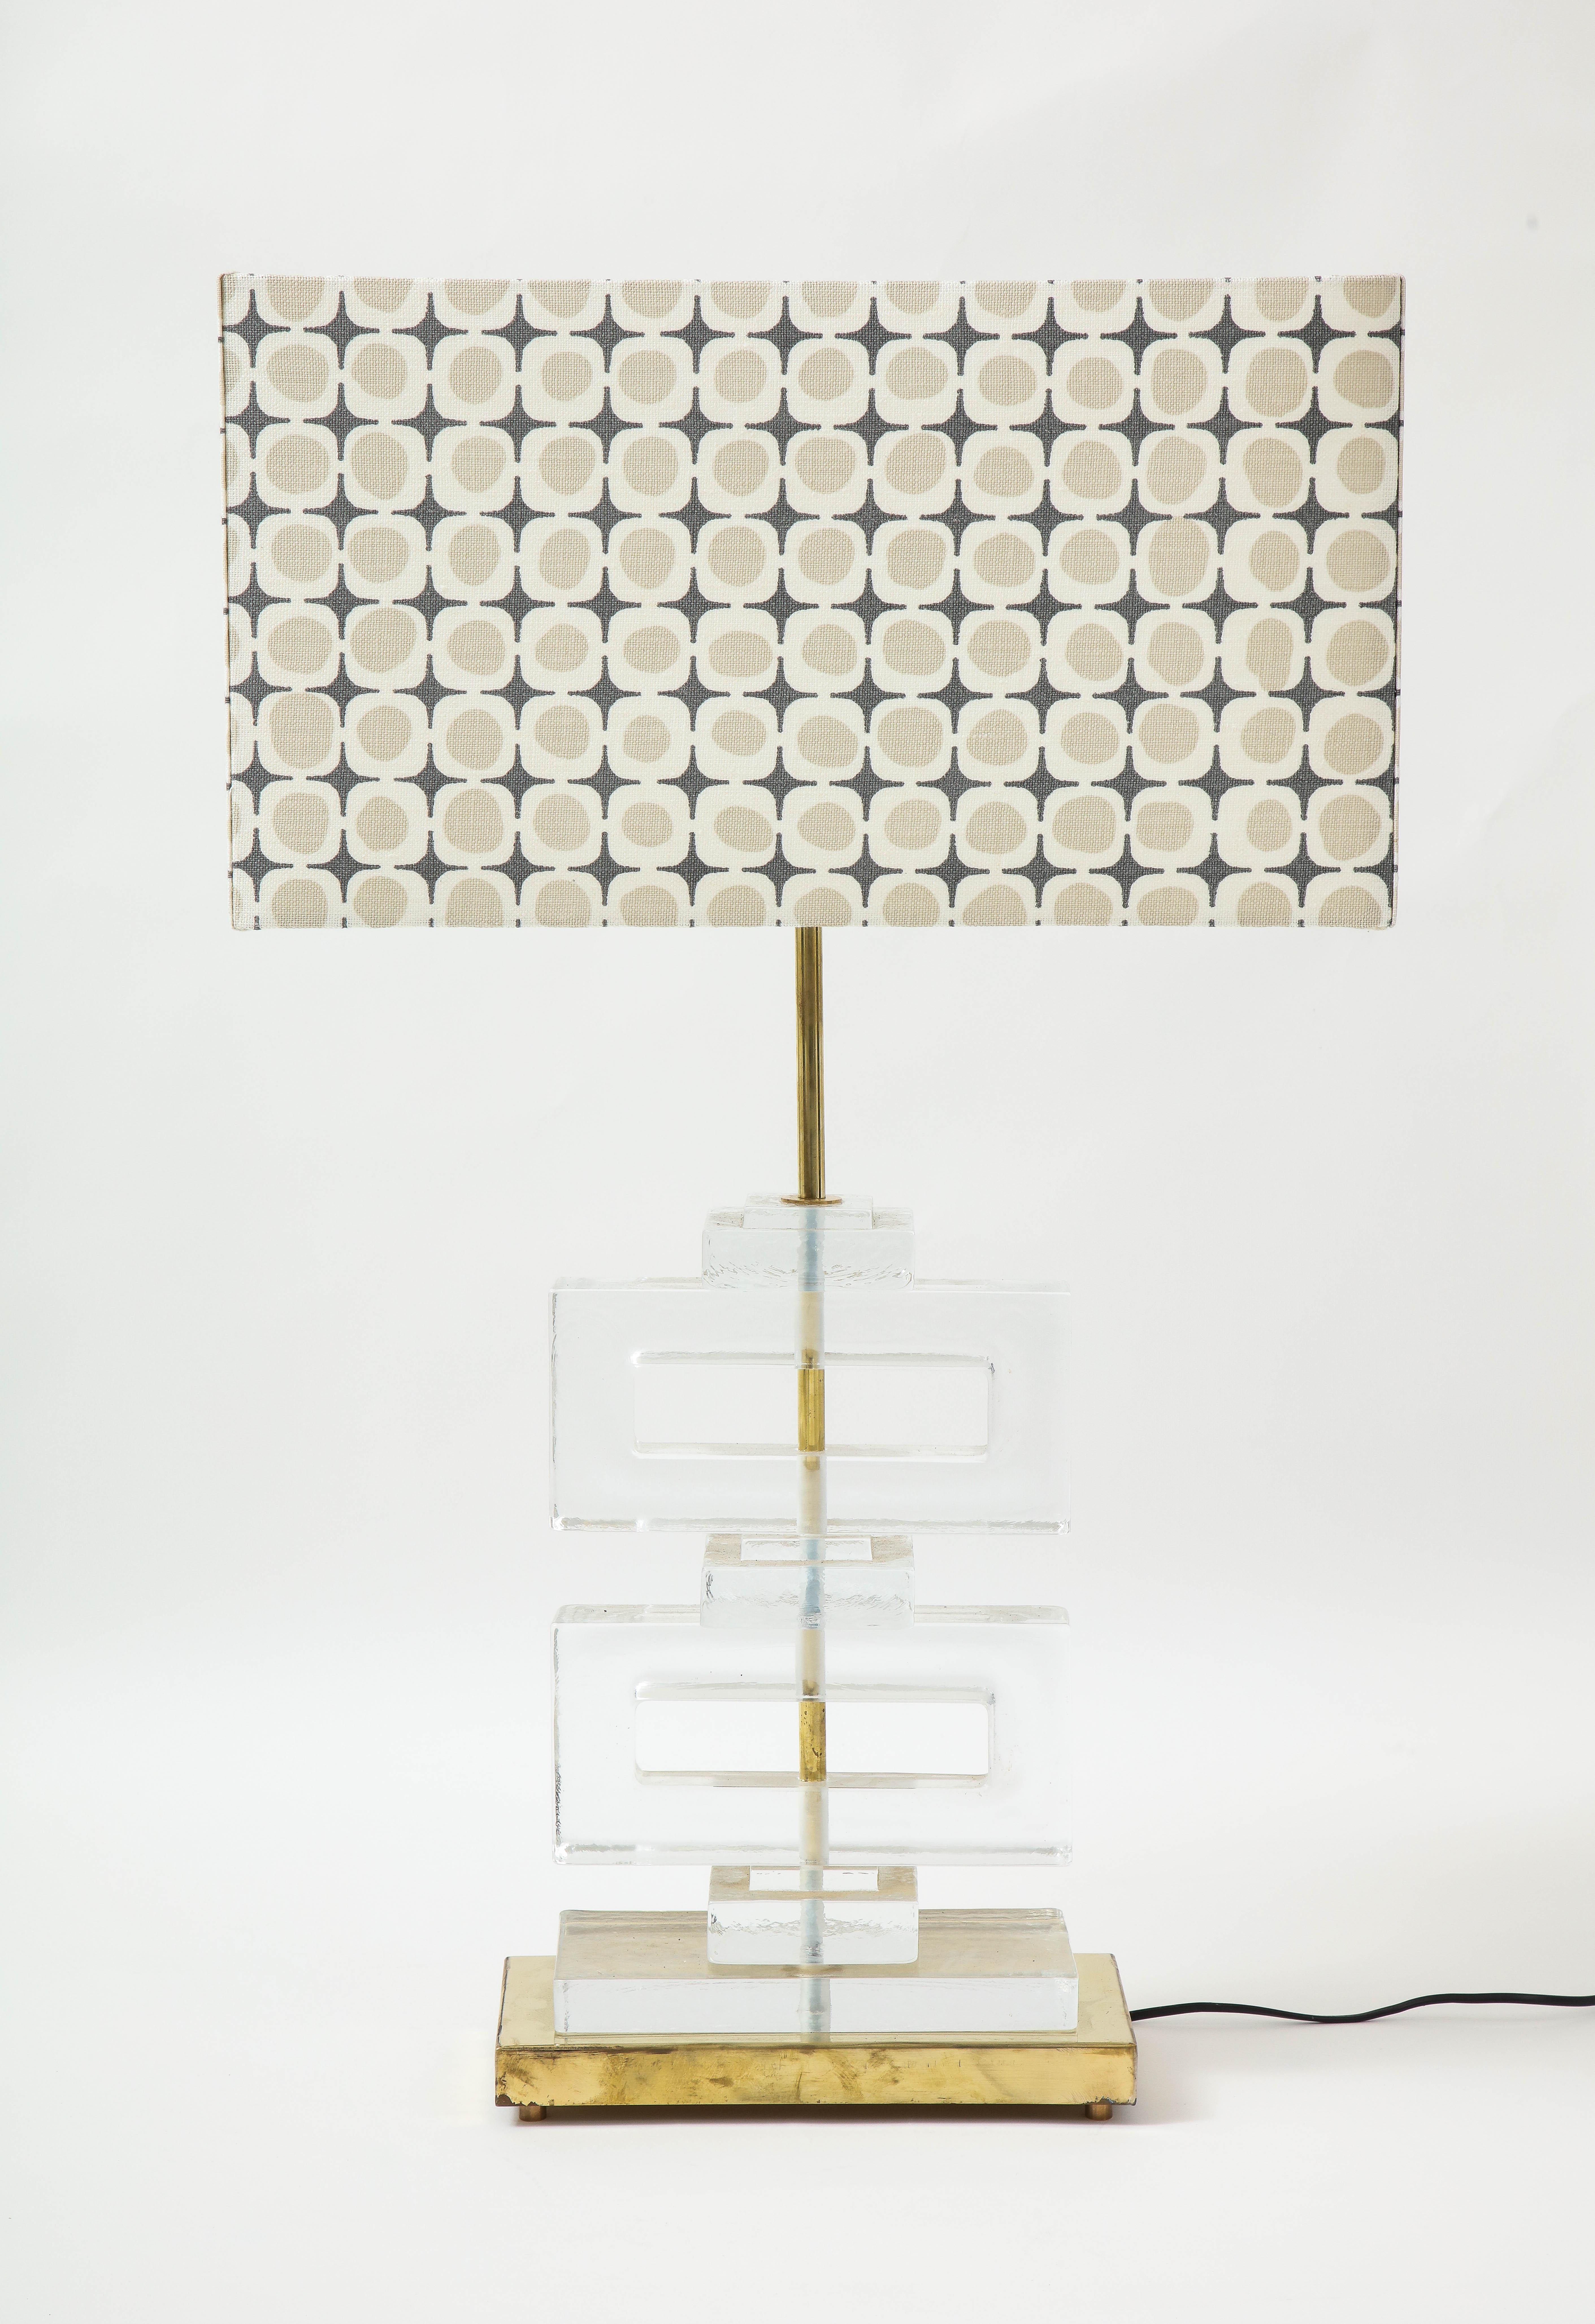 A pair of 21st century molded clear glass Murano lamps. The clear blocks are a classic Mid Century modern motif seen often in screens. The glass blocks sit on a brass base and have a brass rod. A wonderful custom-made lampshade completed the look.